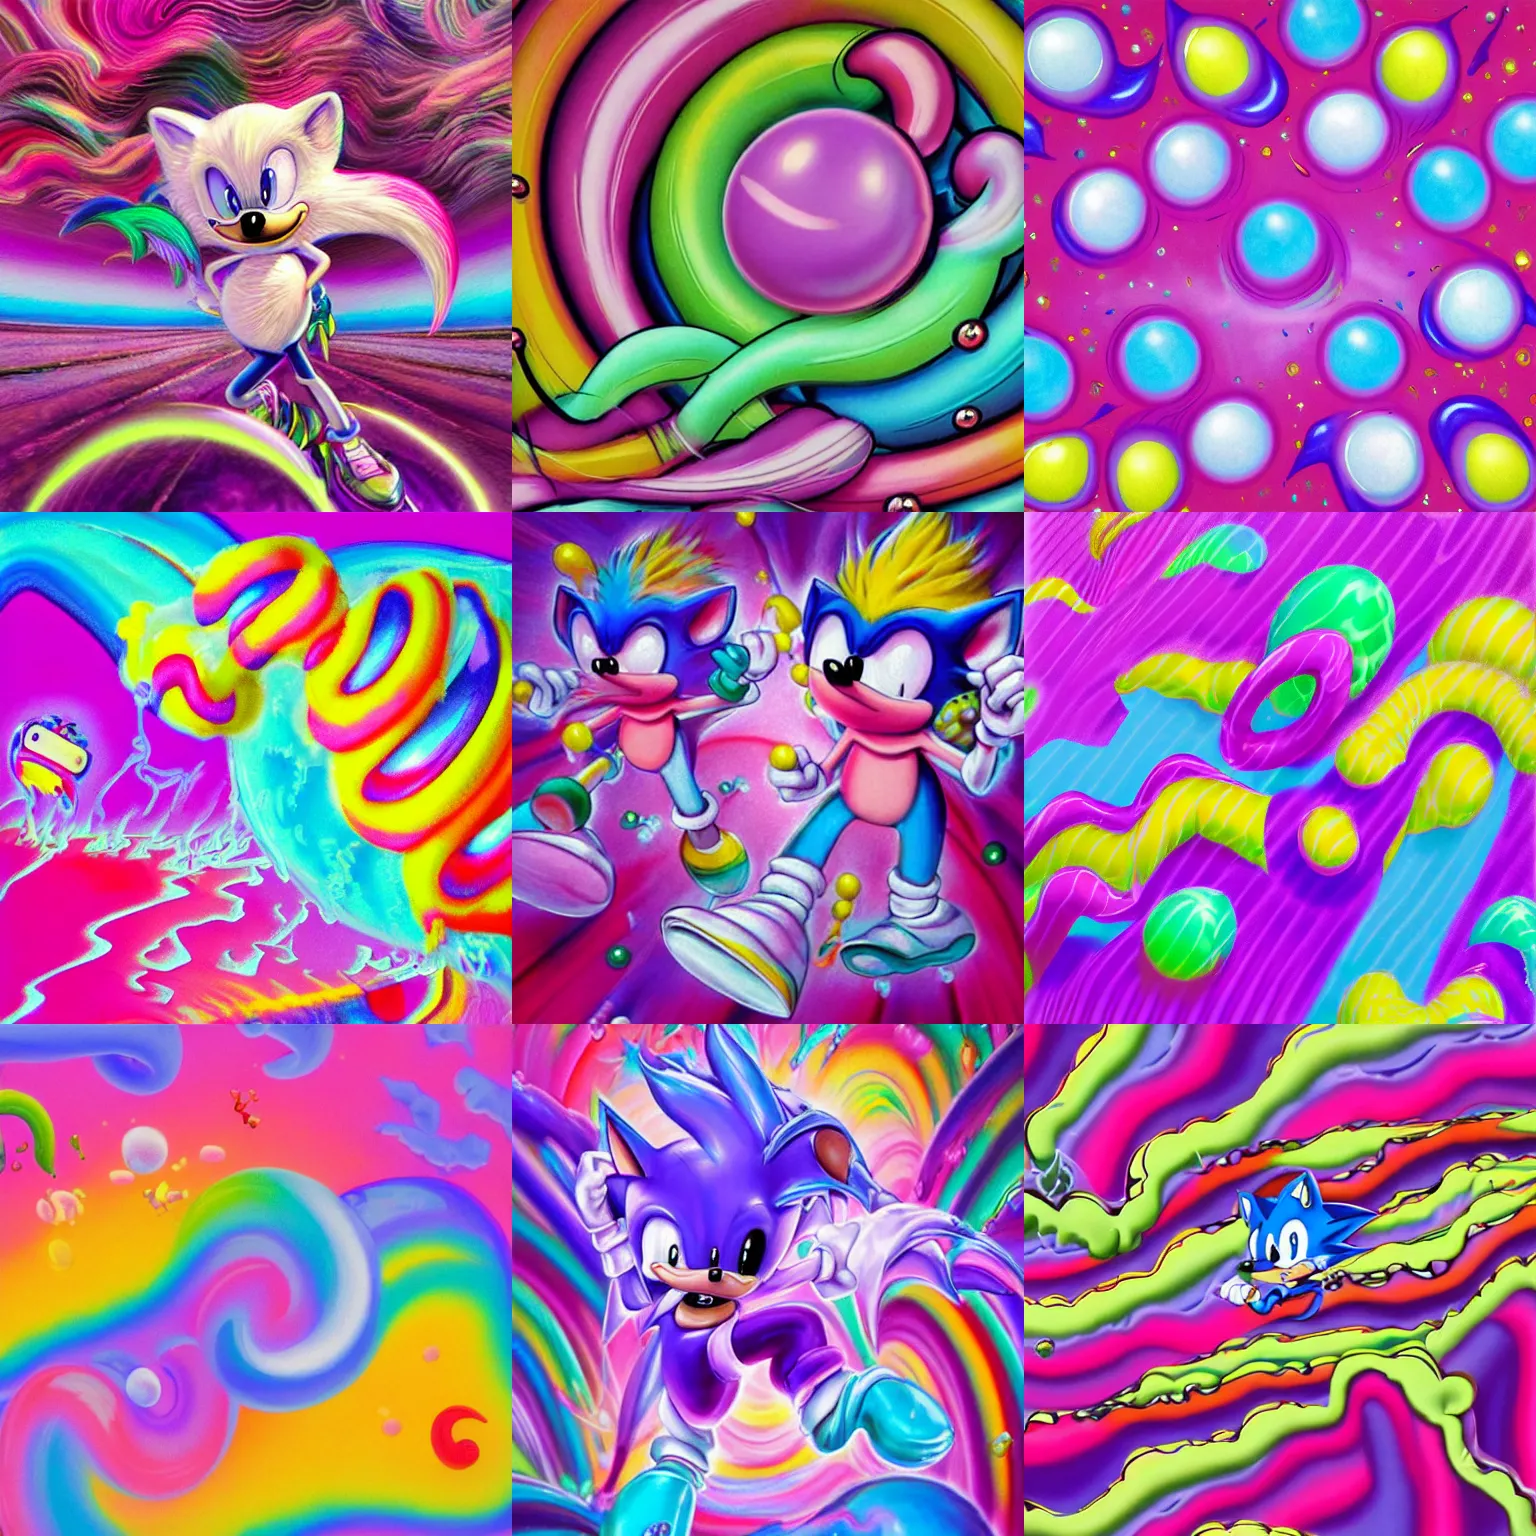 Prompt: cotton candy, surreal, sharp, detailed professional, soft pastels, high quality airbrush art album cover of a liquid bubbles airbrush art lsd taffy dmt sonic the hedgehog dashing through cotton candy, purple checkerboard background, 1 9 9 0 s 1 9 9 2 sega genesis rareware video game album cover, drop shadows